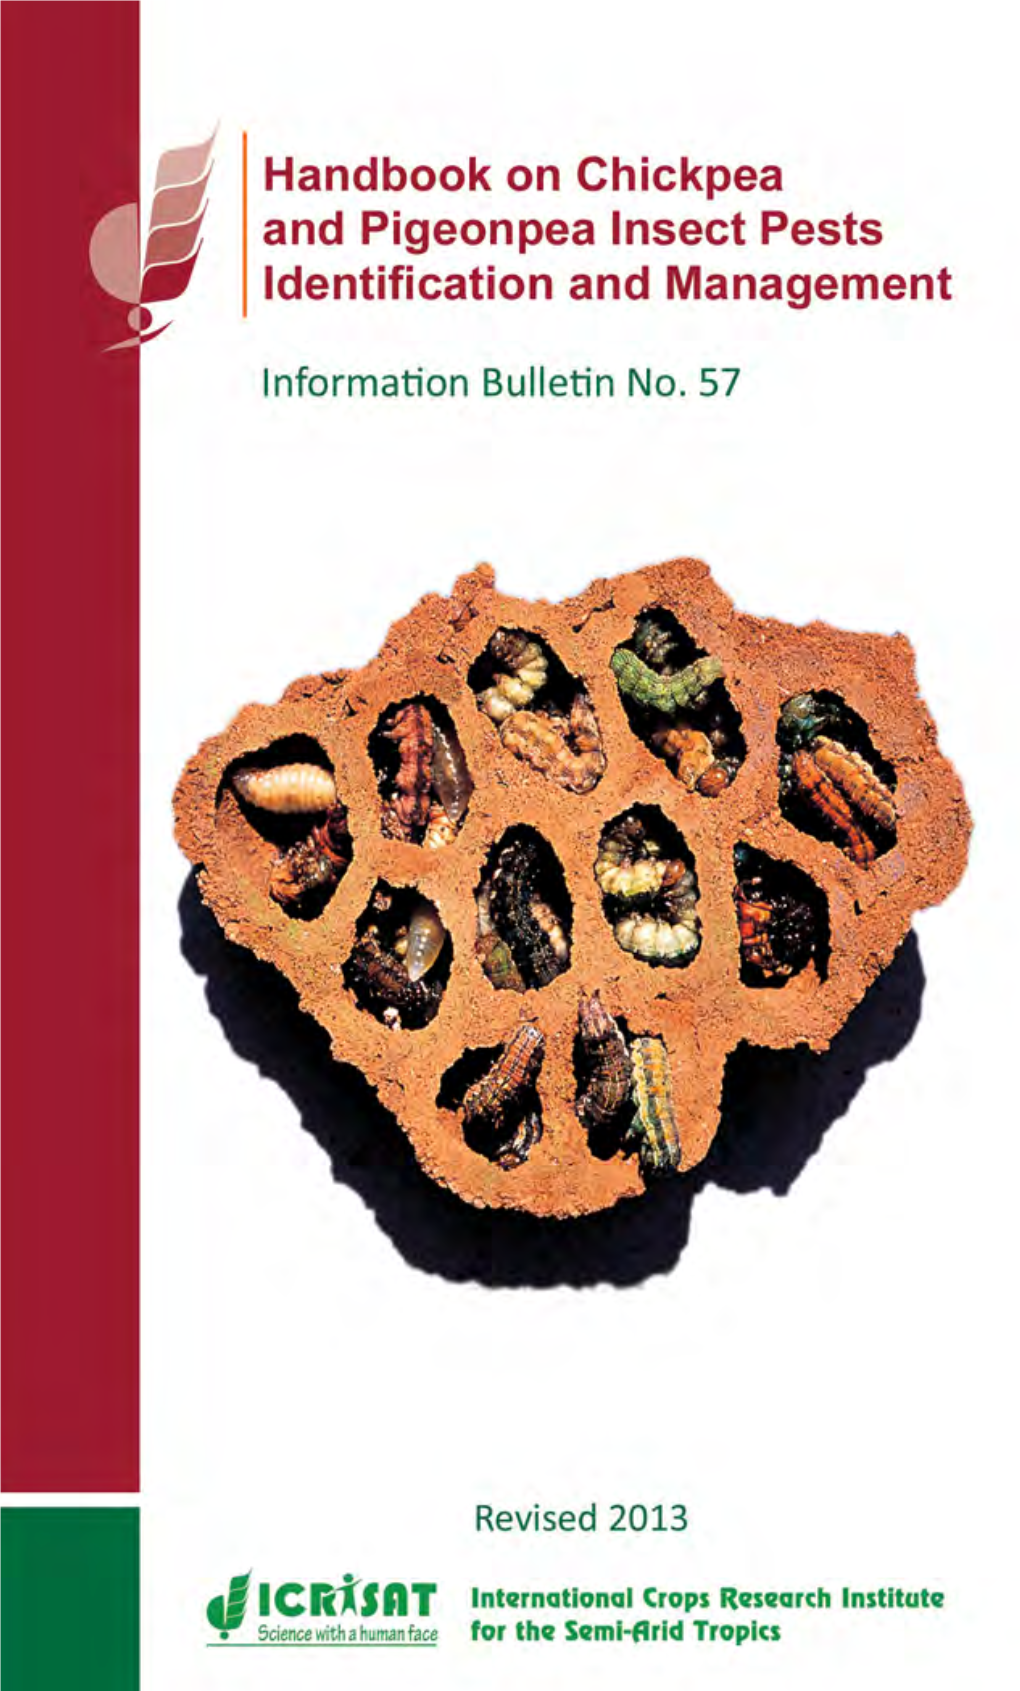 Handbook on Chickpea and Pigeonpea Insect Pests Identification and Management